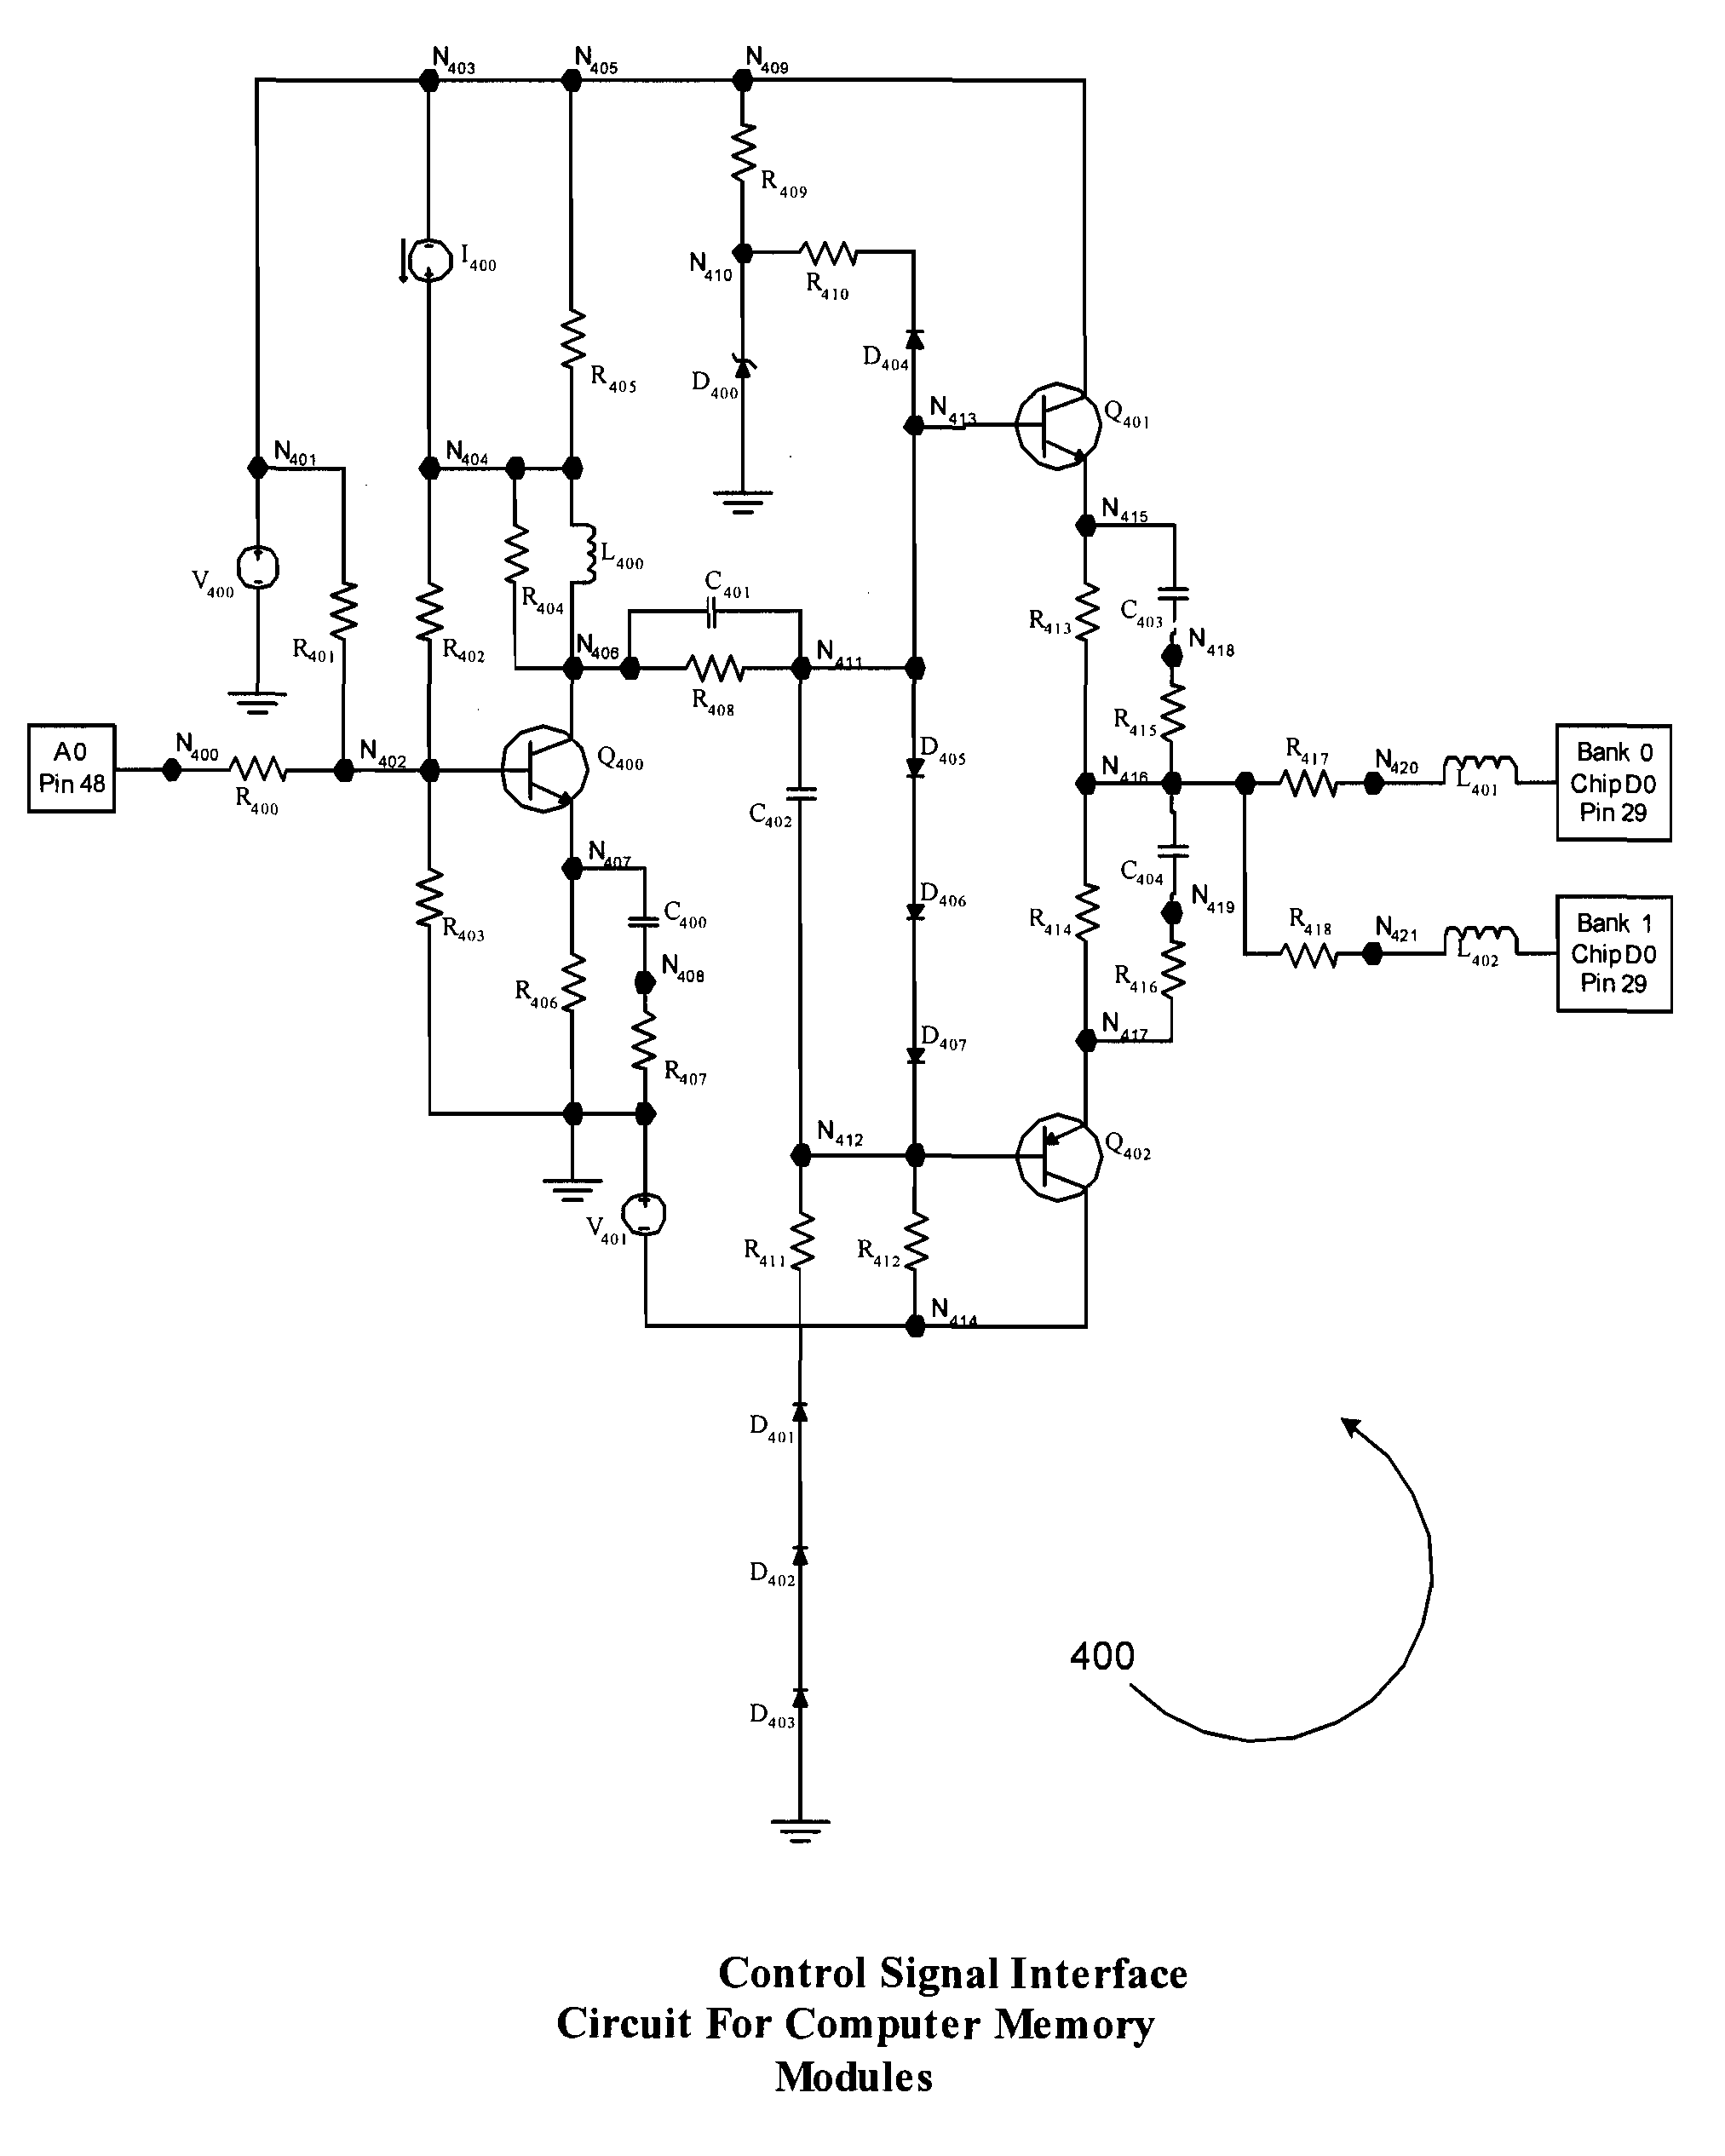 Control signal interface circuit for computer memory modules